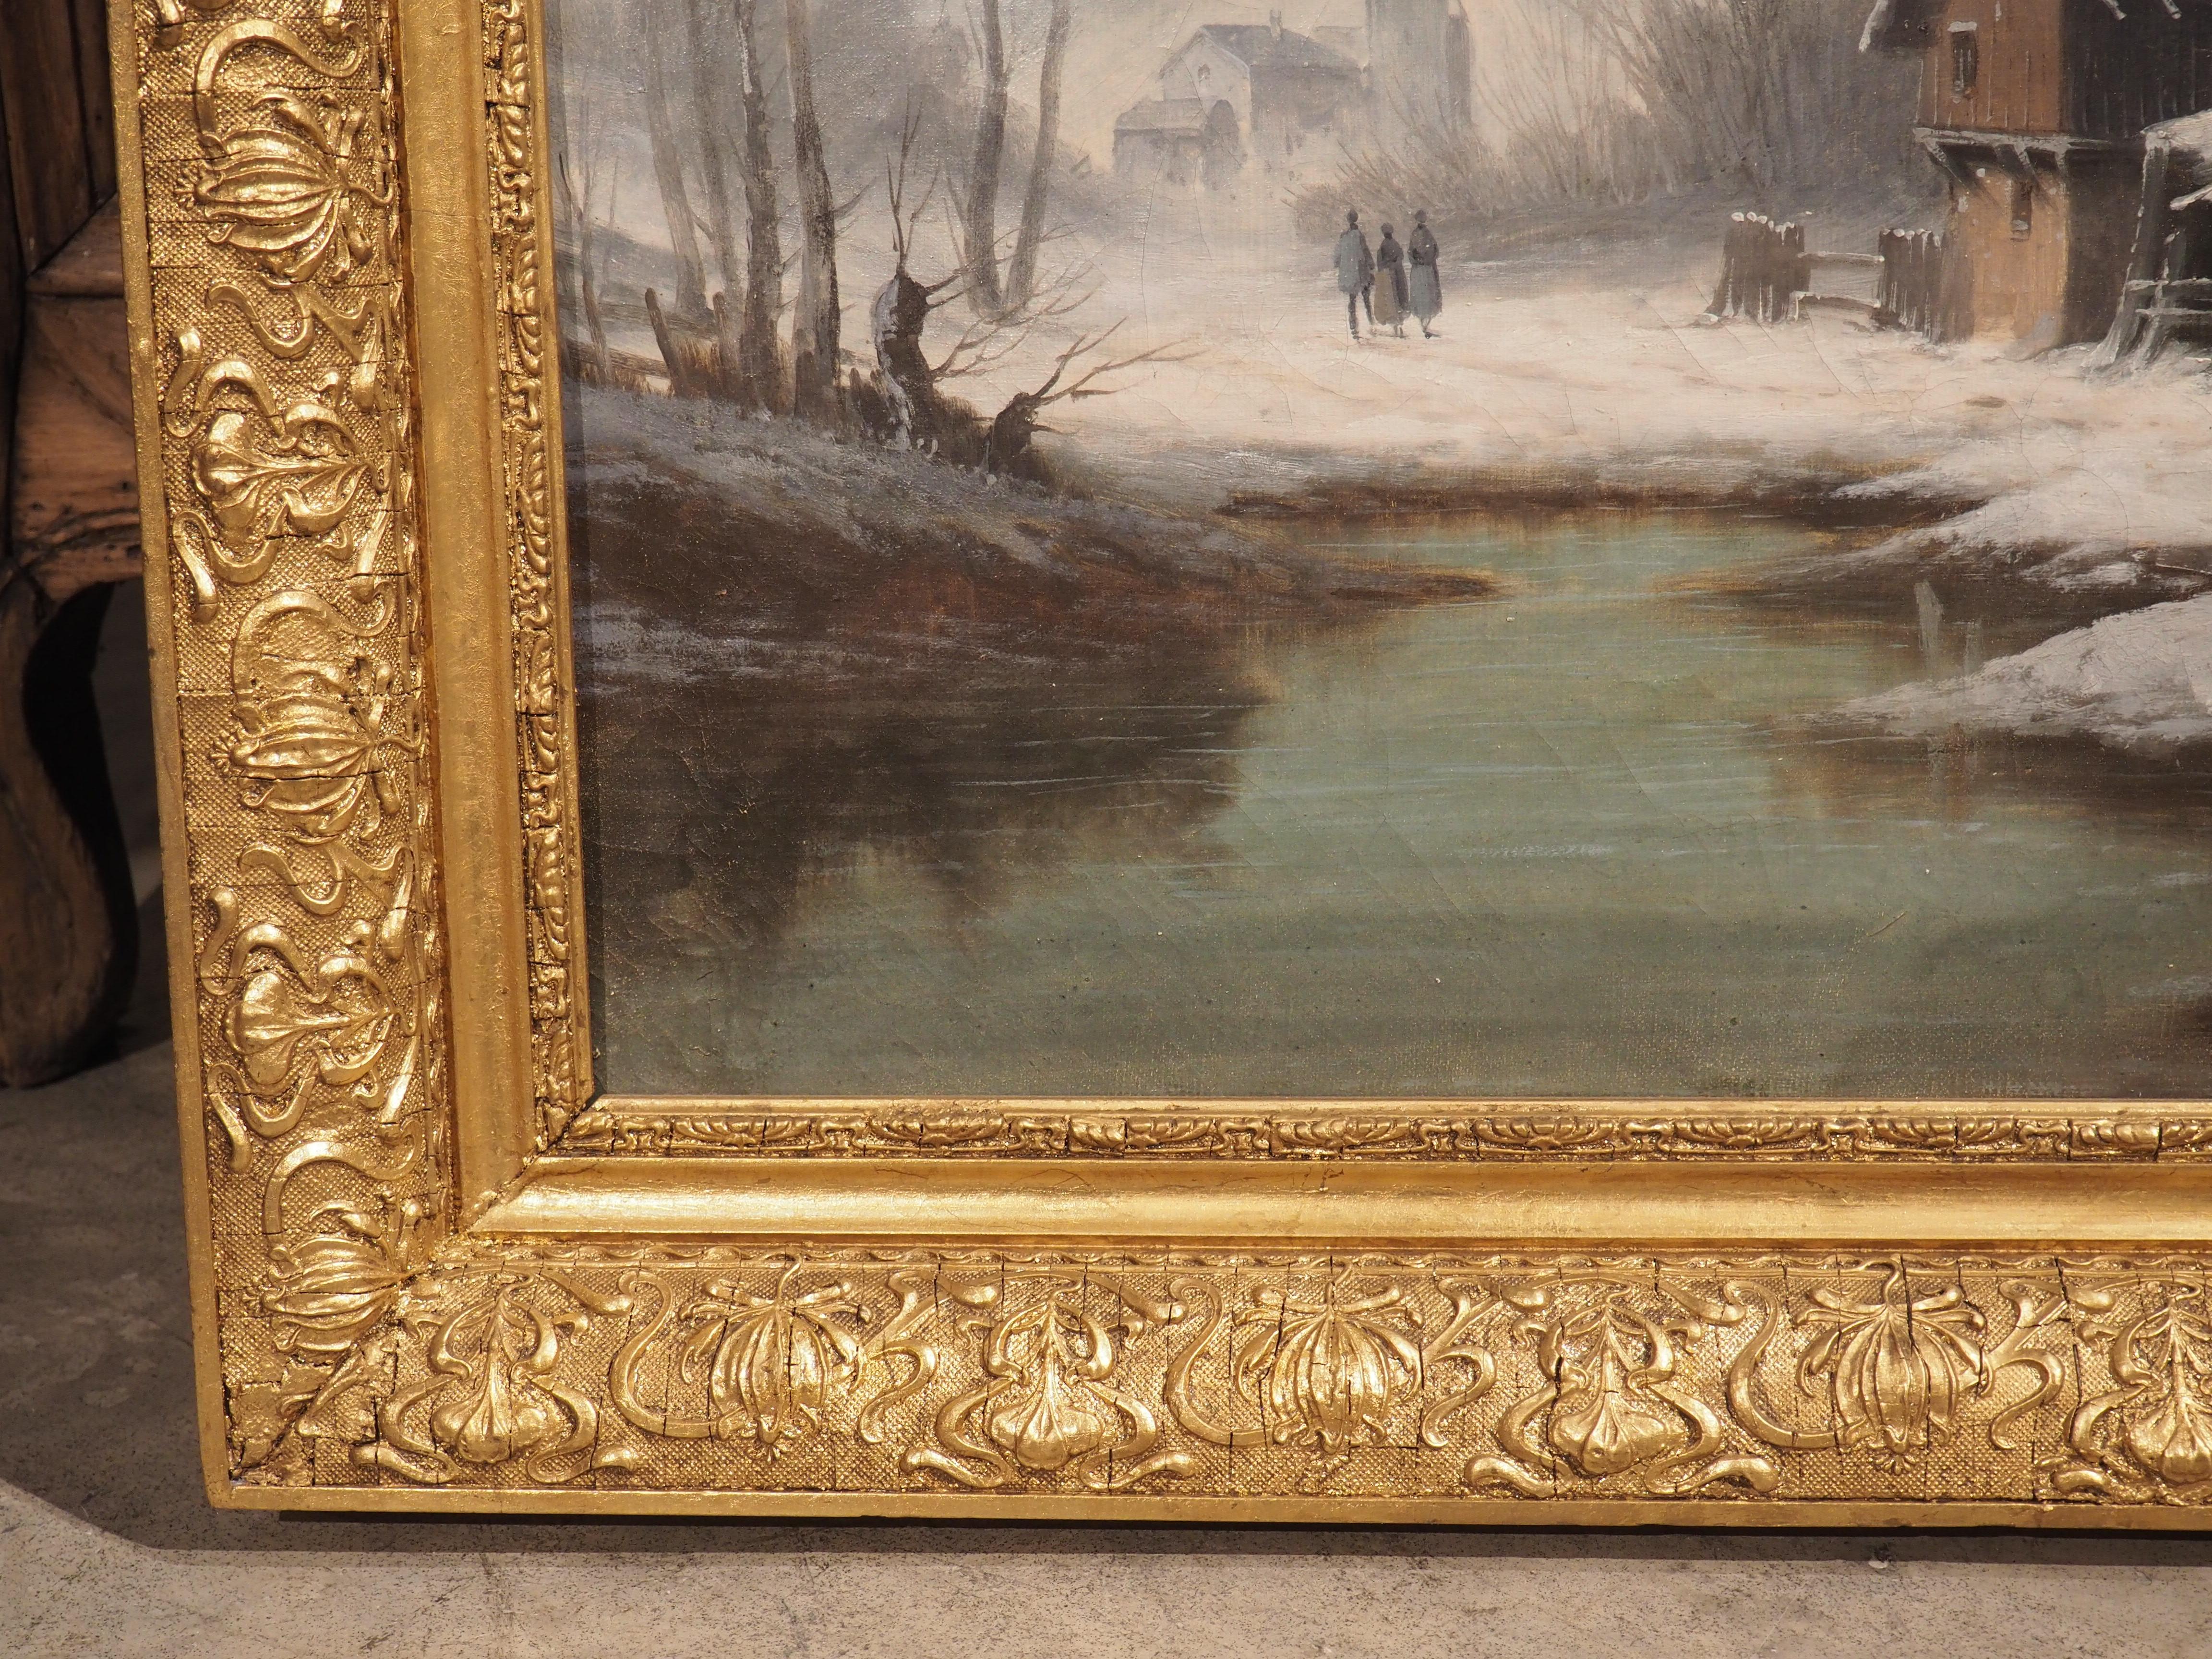 This French winter landscape painting from the 1800’s sits securely in the original giltwood frame. The hand-carved frame has several long ribbons, with sinuous fabric curls encompassing a repeating border of two distinct flowers. A slender cavetto